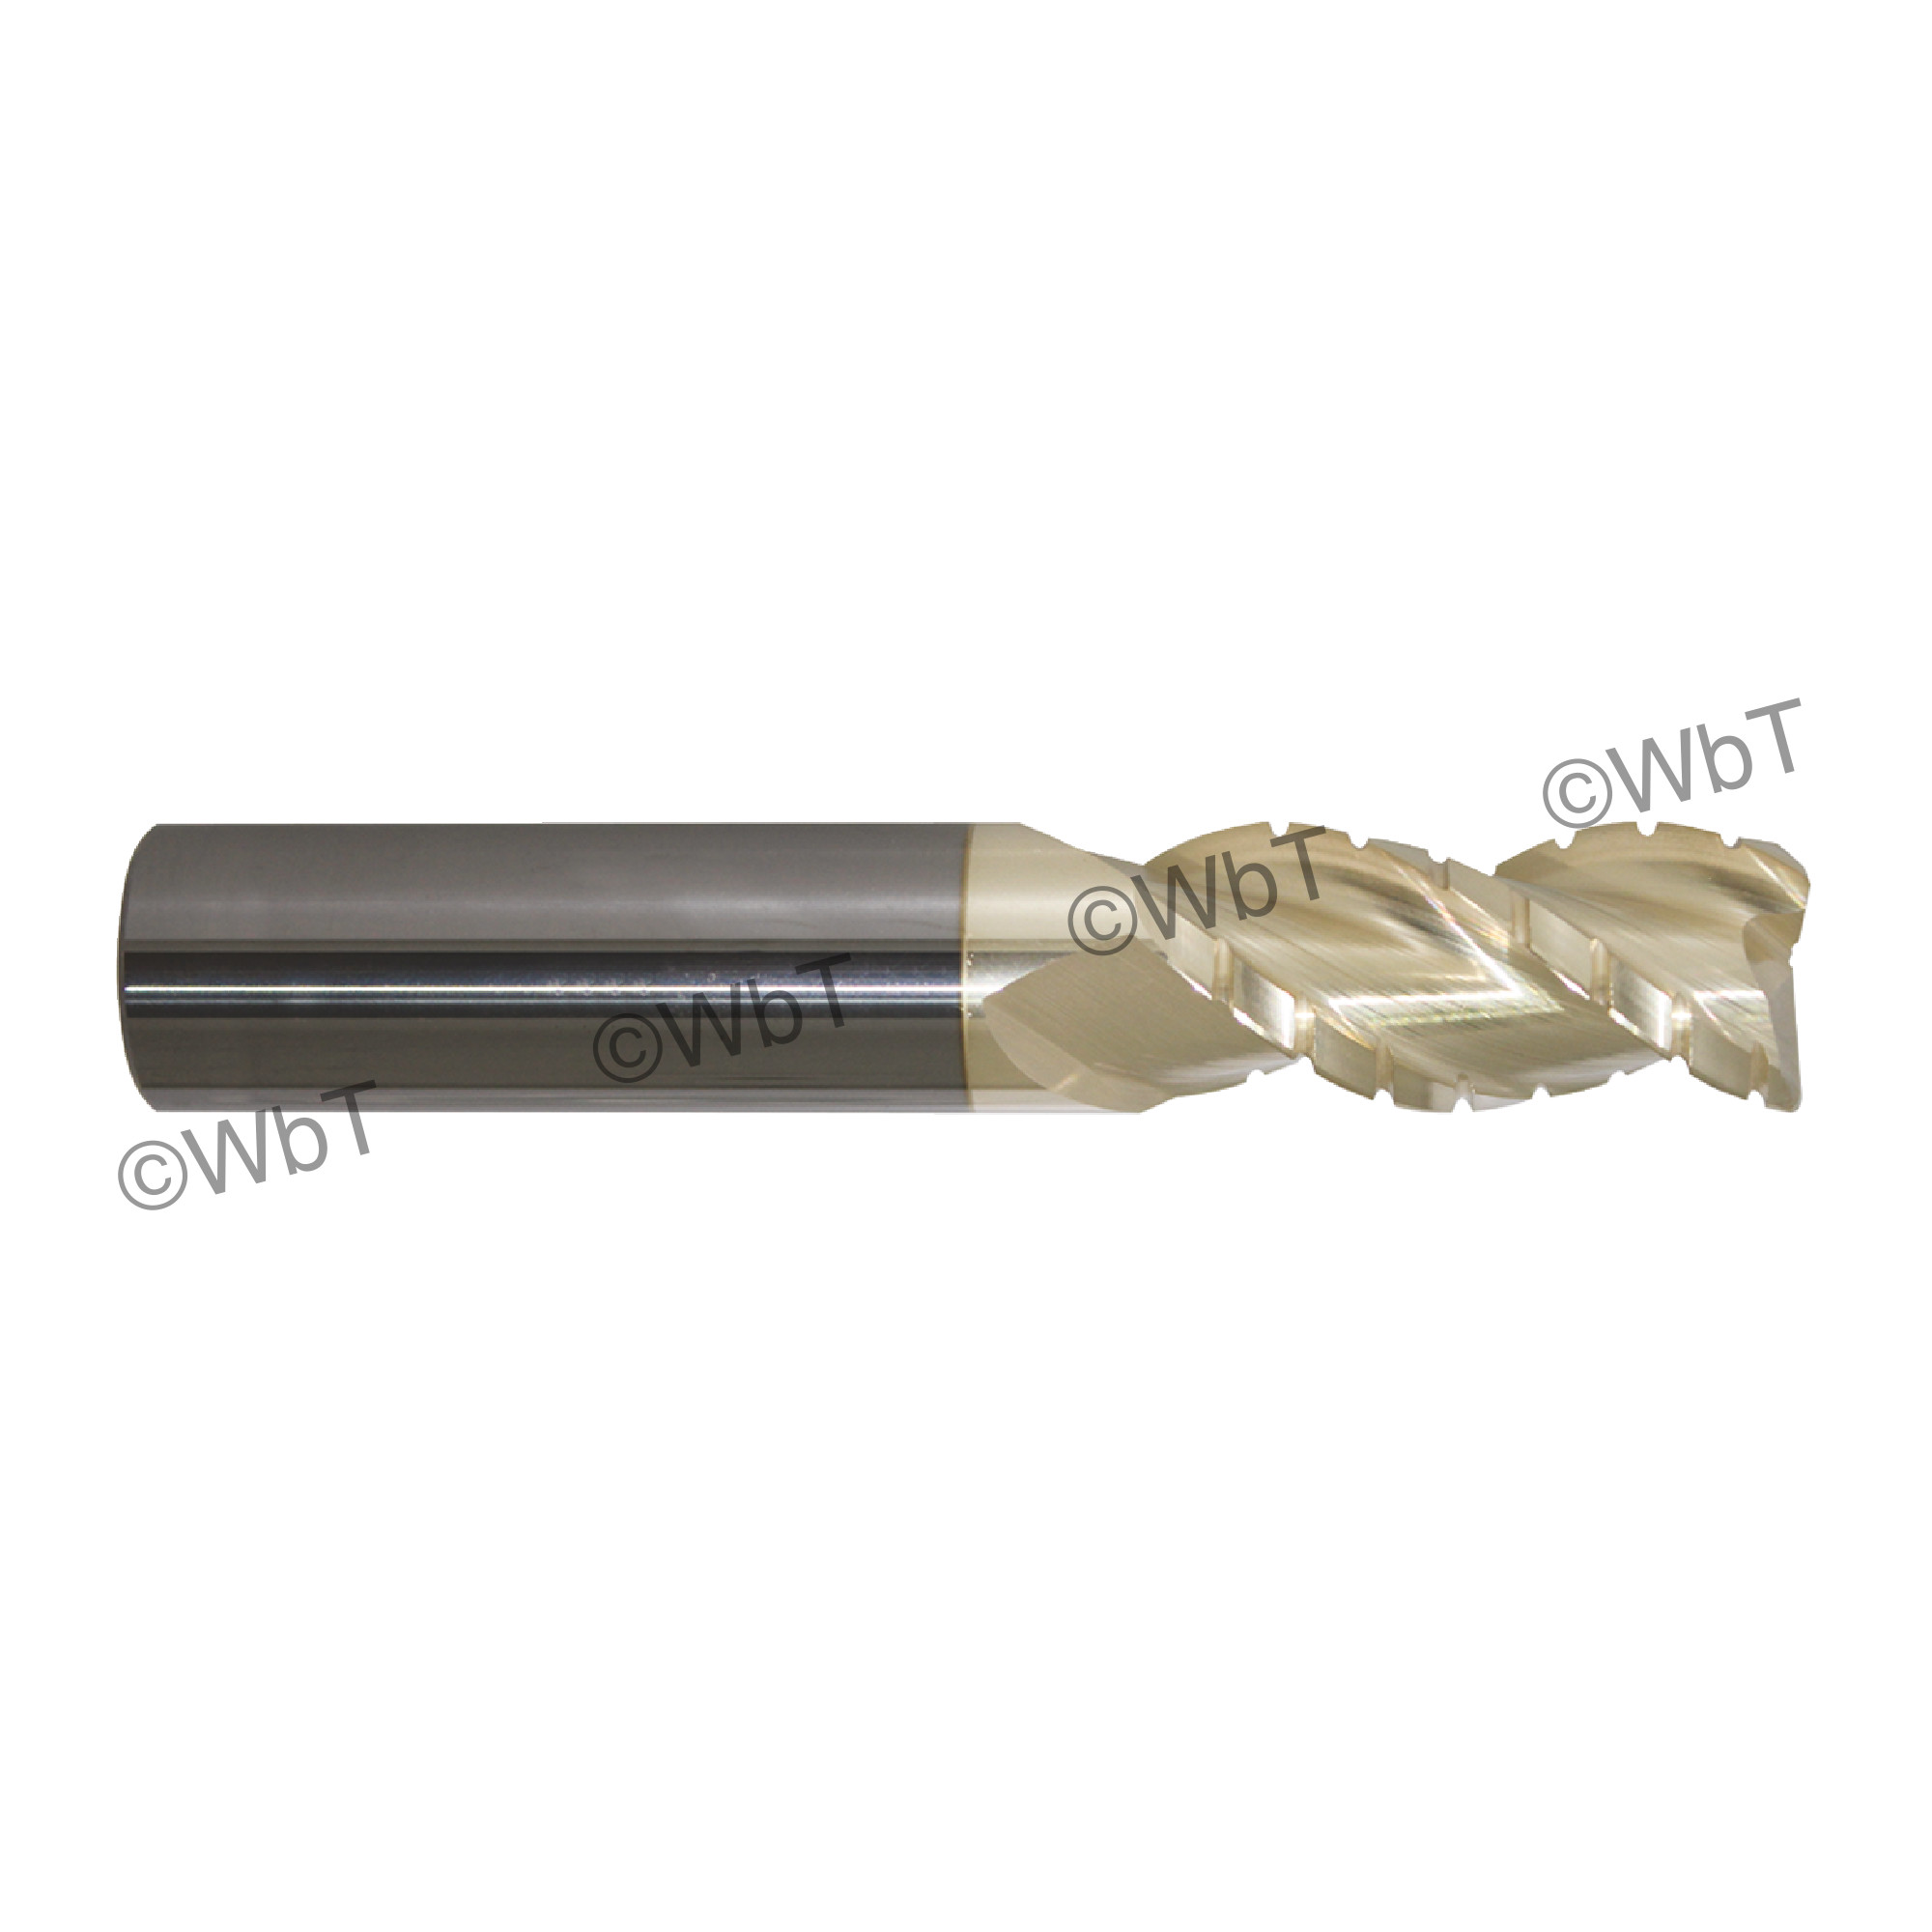 Promax Solid Carbide 3 Flute Roughing-Finishing Corner Radius End Mill 3/8" 119-02446 Series 119